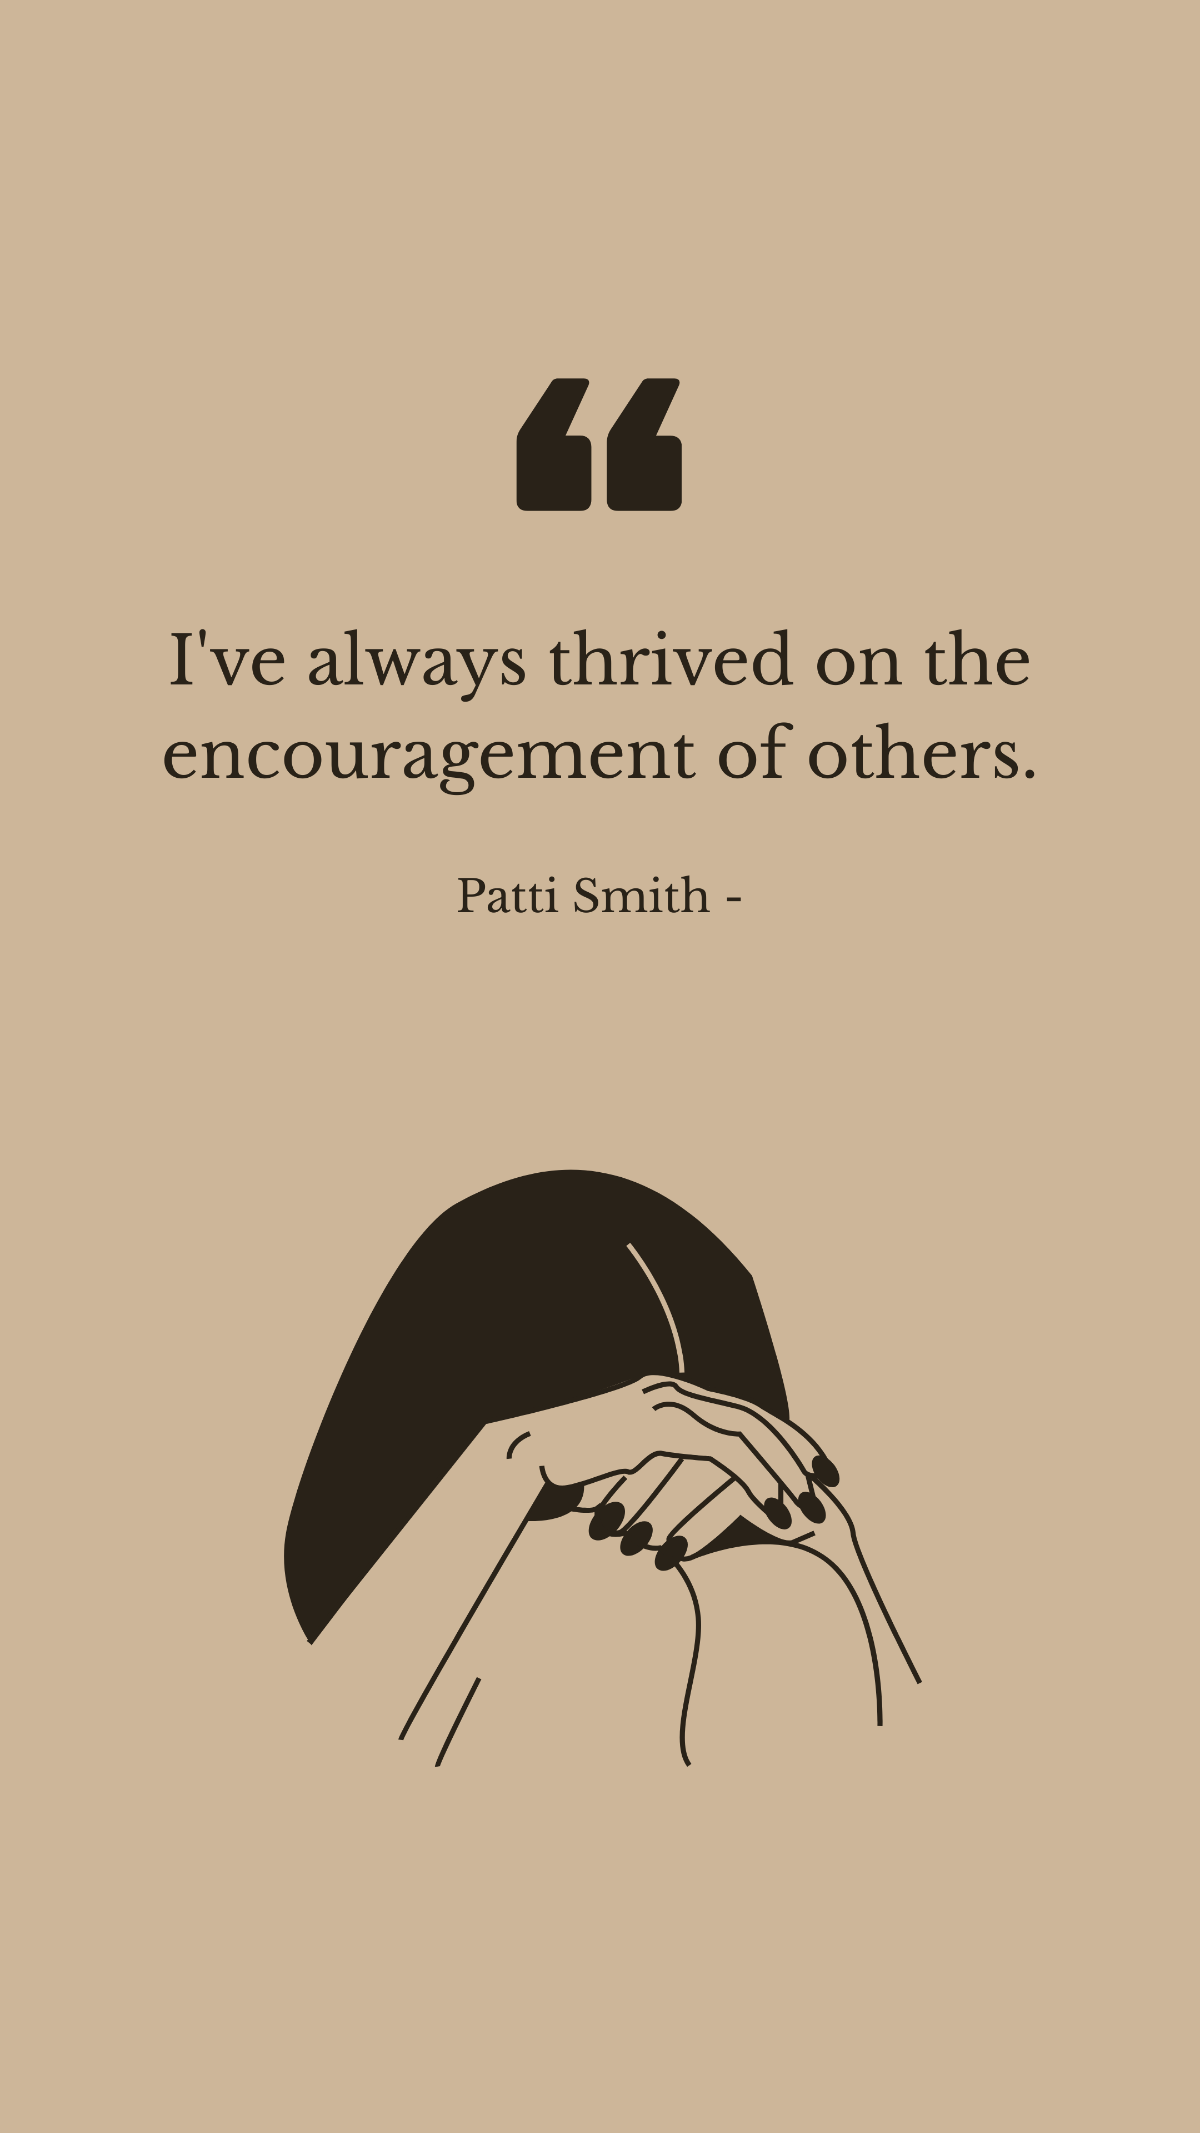 Patti Smith - I've always thrived on the encouragement of others. Template